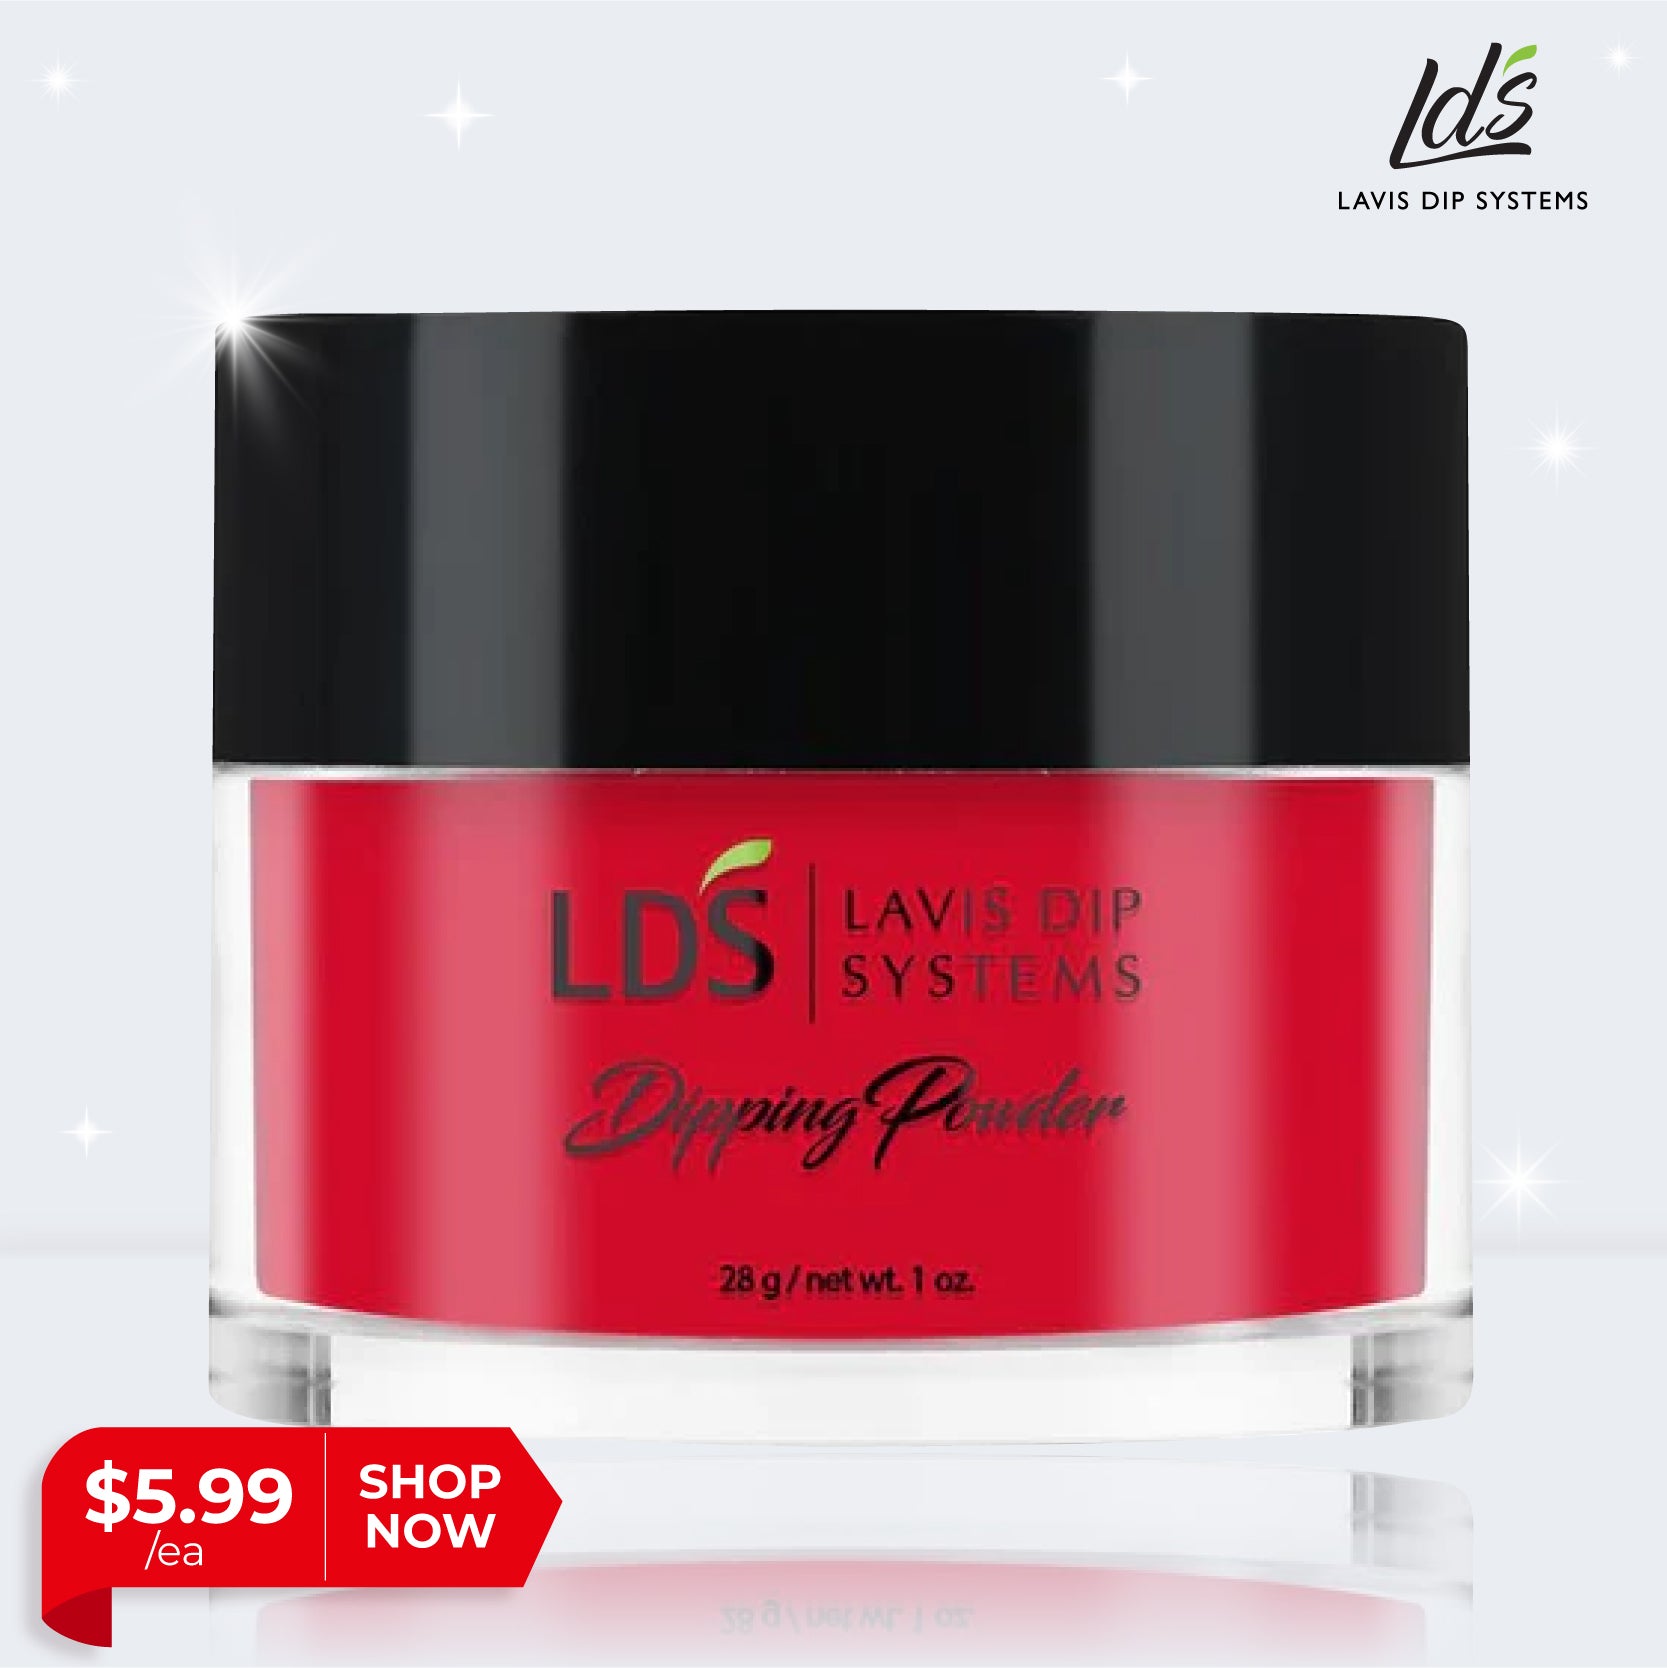 LDS DIPPING POWDER COLOR 1 OZ